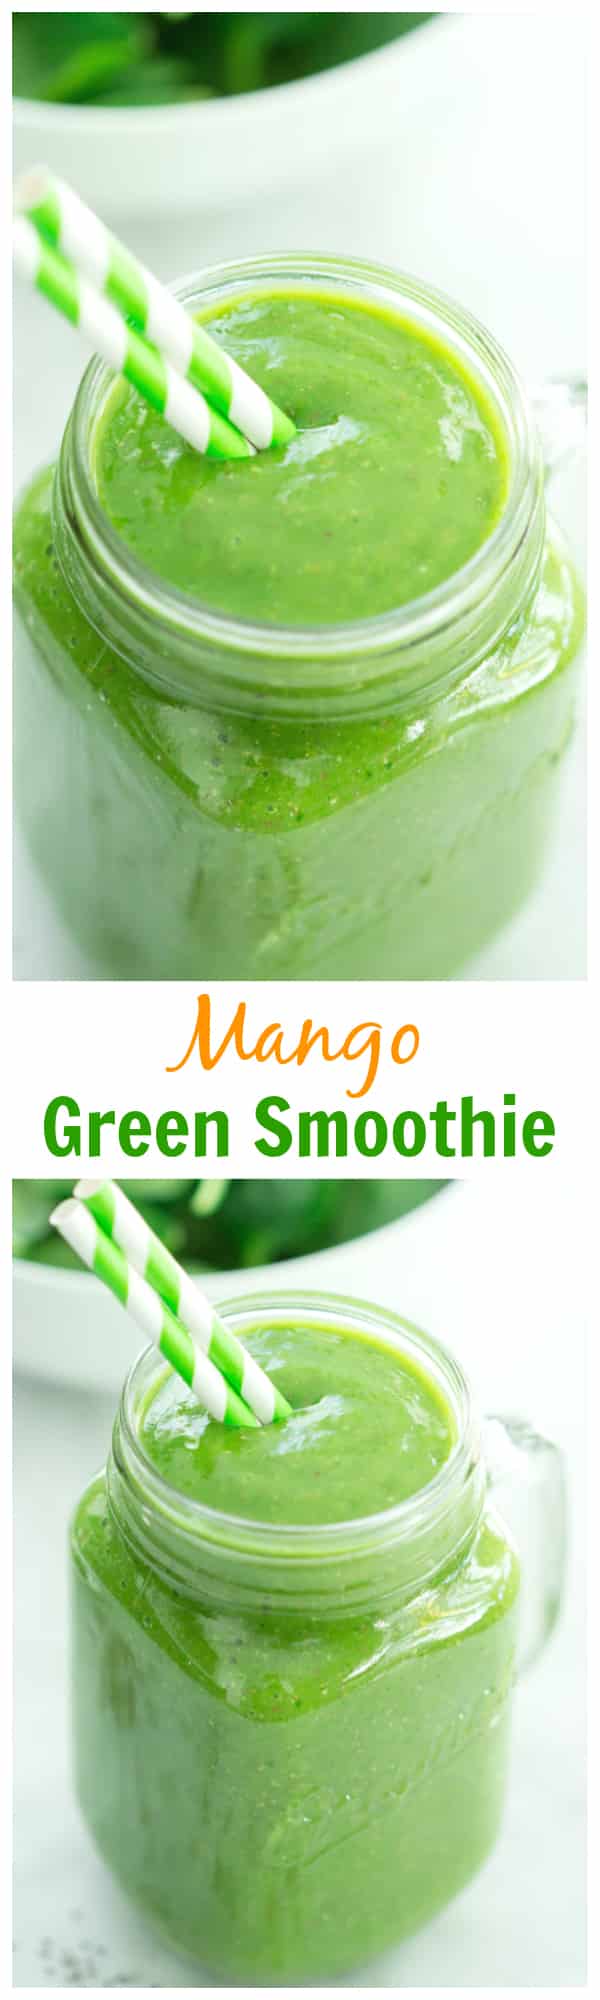 Mango Green Smoothie - This is the fastest way to get more greens in your diet. Make this delicious Mango Green Smoothie and start your day right. 